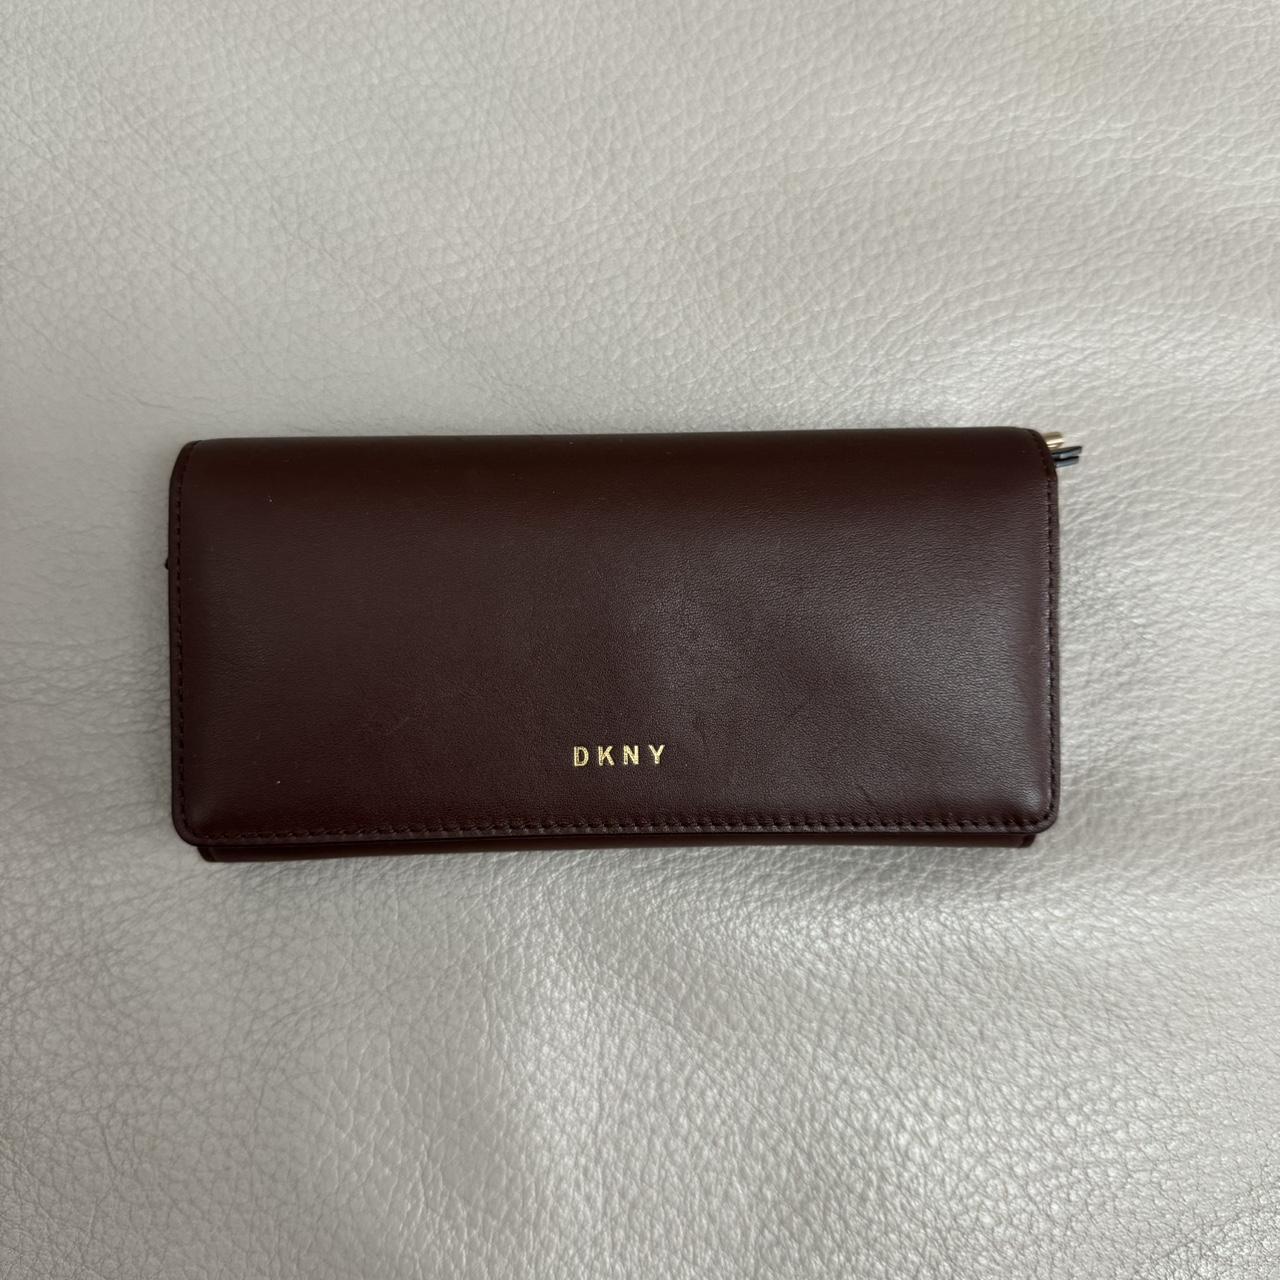 DKNY Womens Full Zip Purse Bags and Wallets Black, Black/Gold, One Size :  DKNY: Amazon.com.au: Clothing, Shoes & Accessories